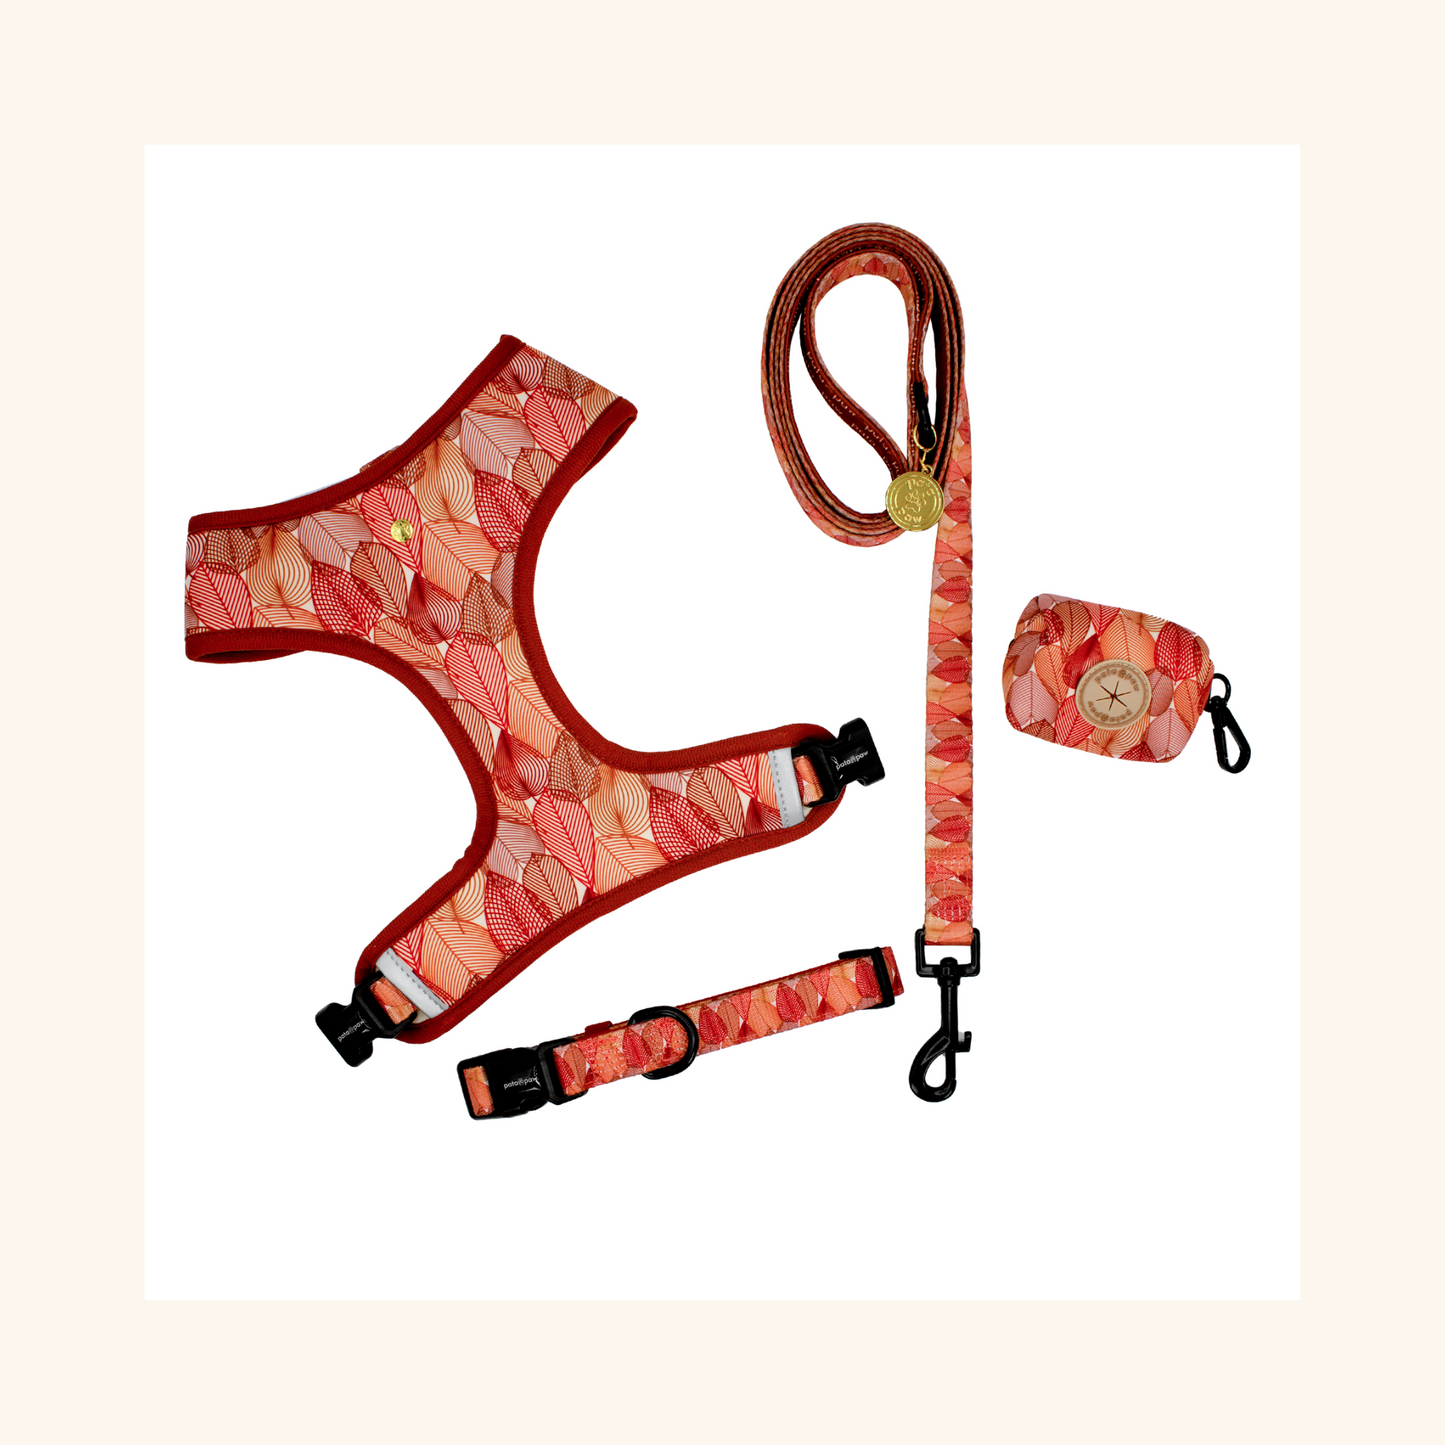 pata paw autumn crunch set: reversible harness, leash, collar, and poop bag holder.